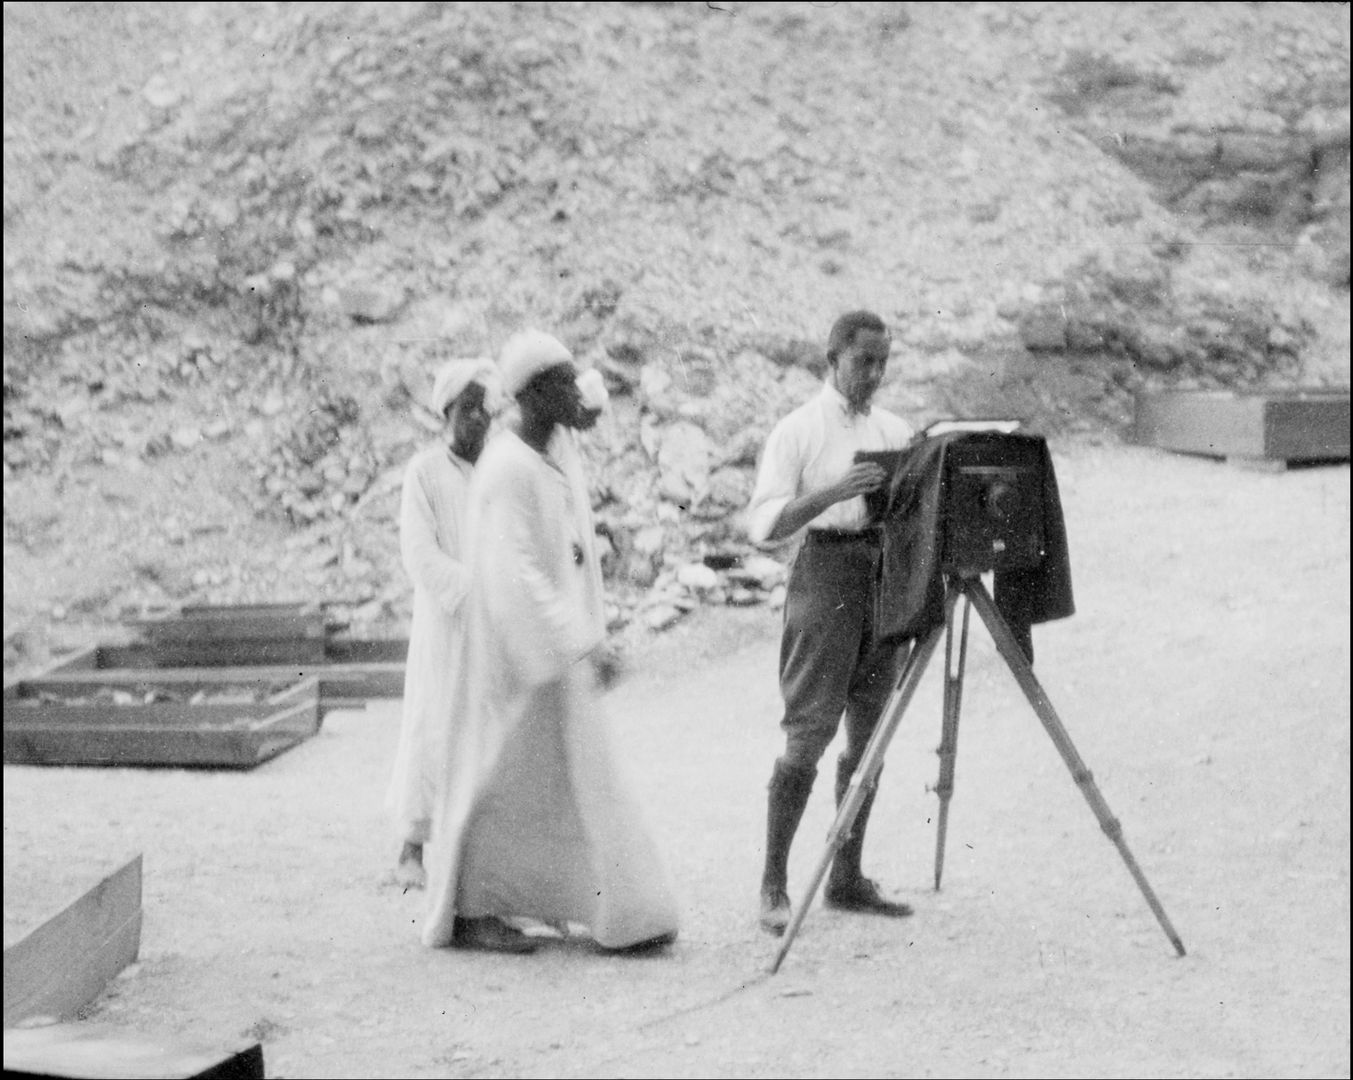 Two men in floor-length white garments stand to the left. A man in trousers and a white shirt stands to the right behind an antique camera on a tripod.